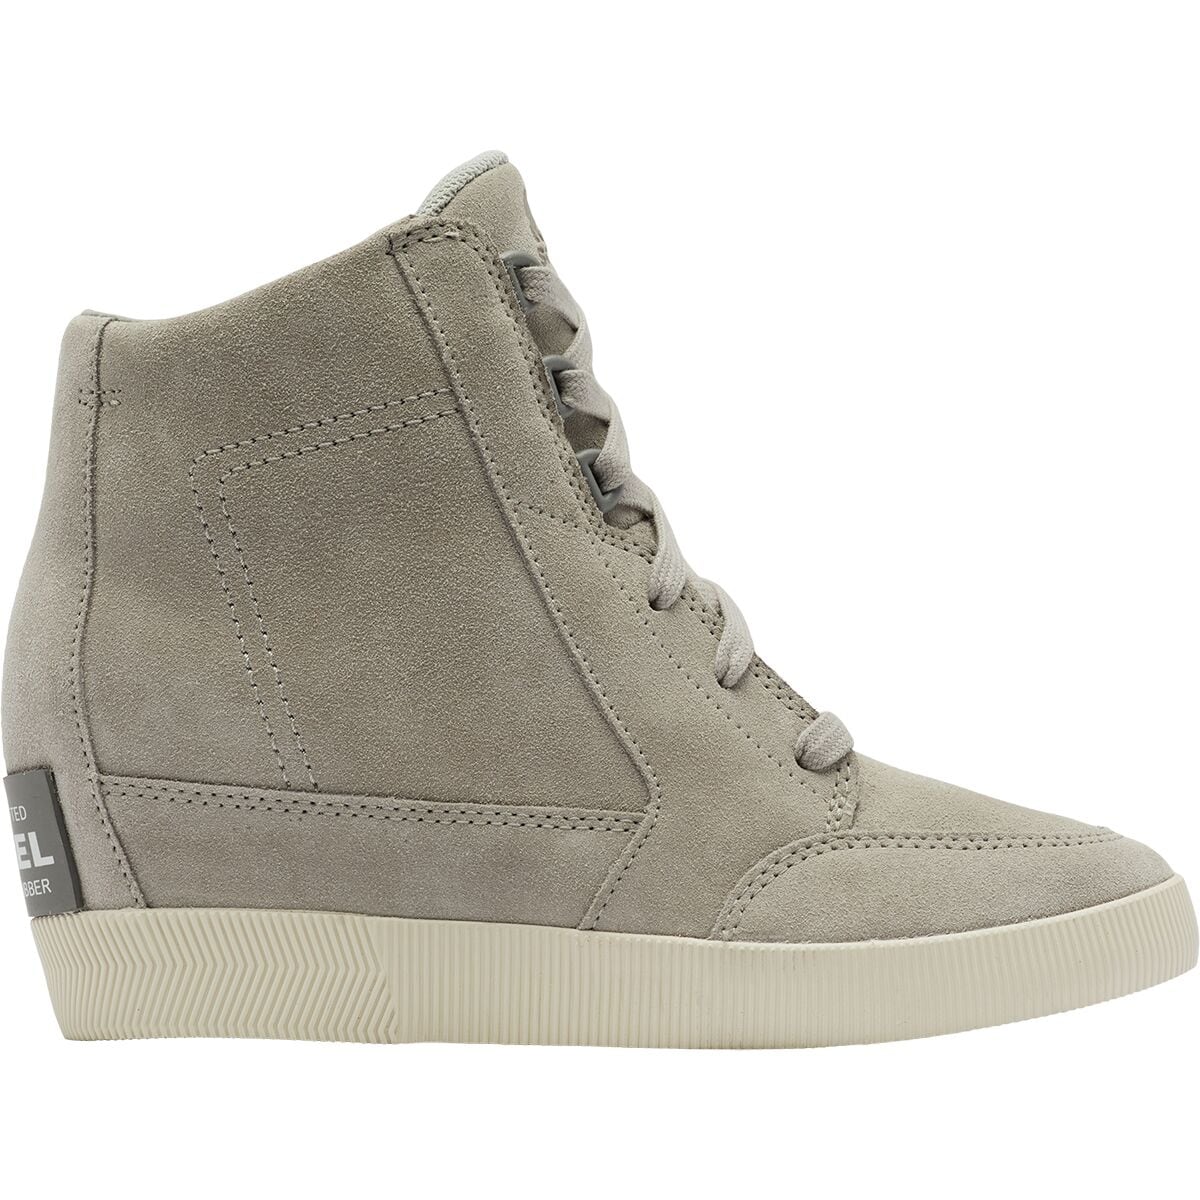 Out N About Wedge II Boot - Women